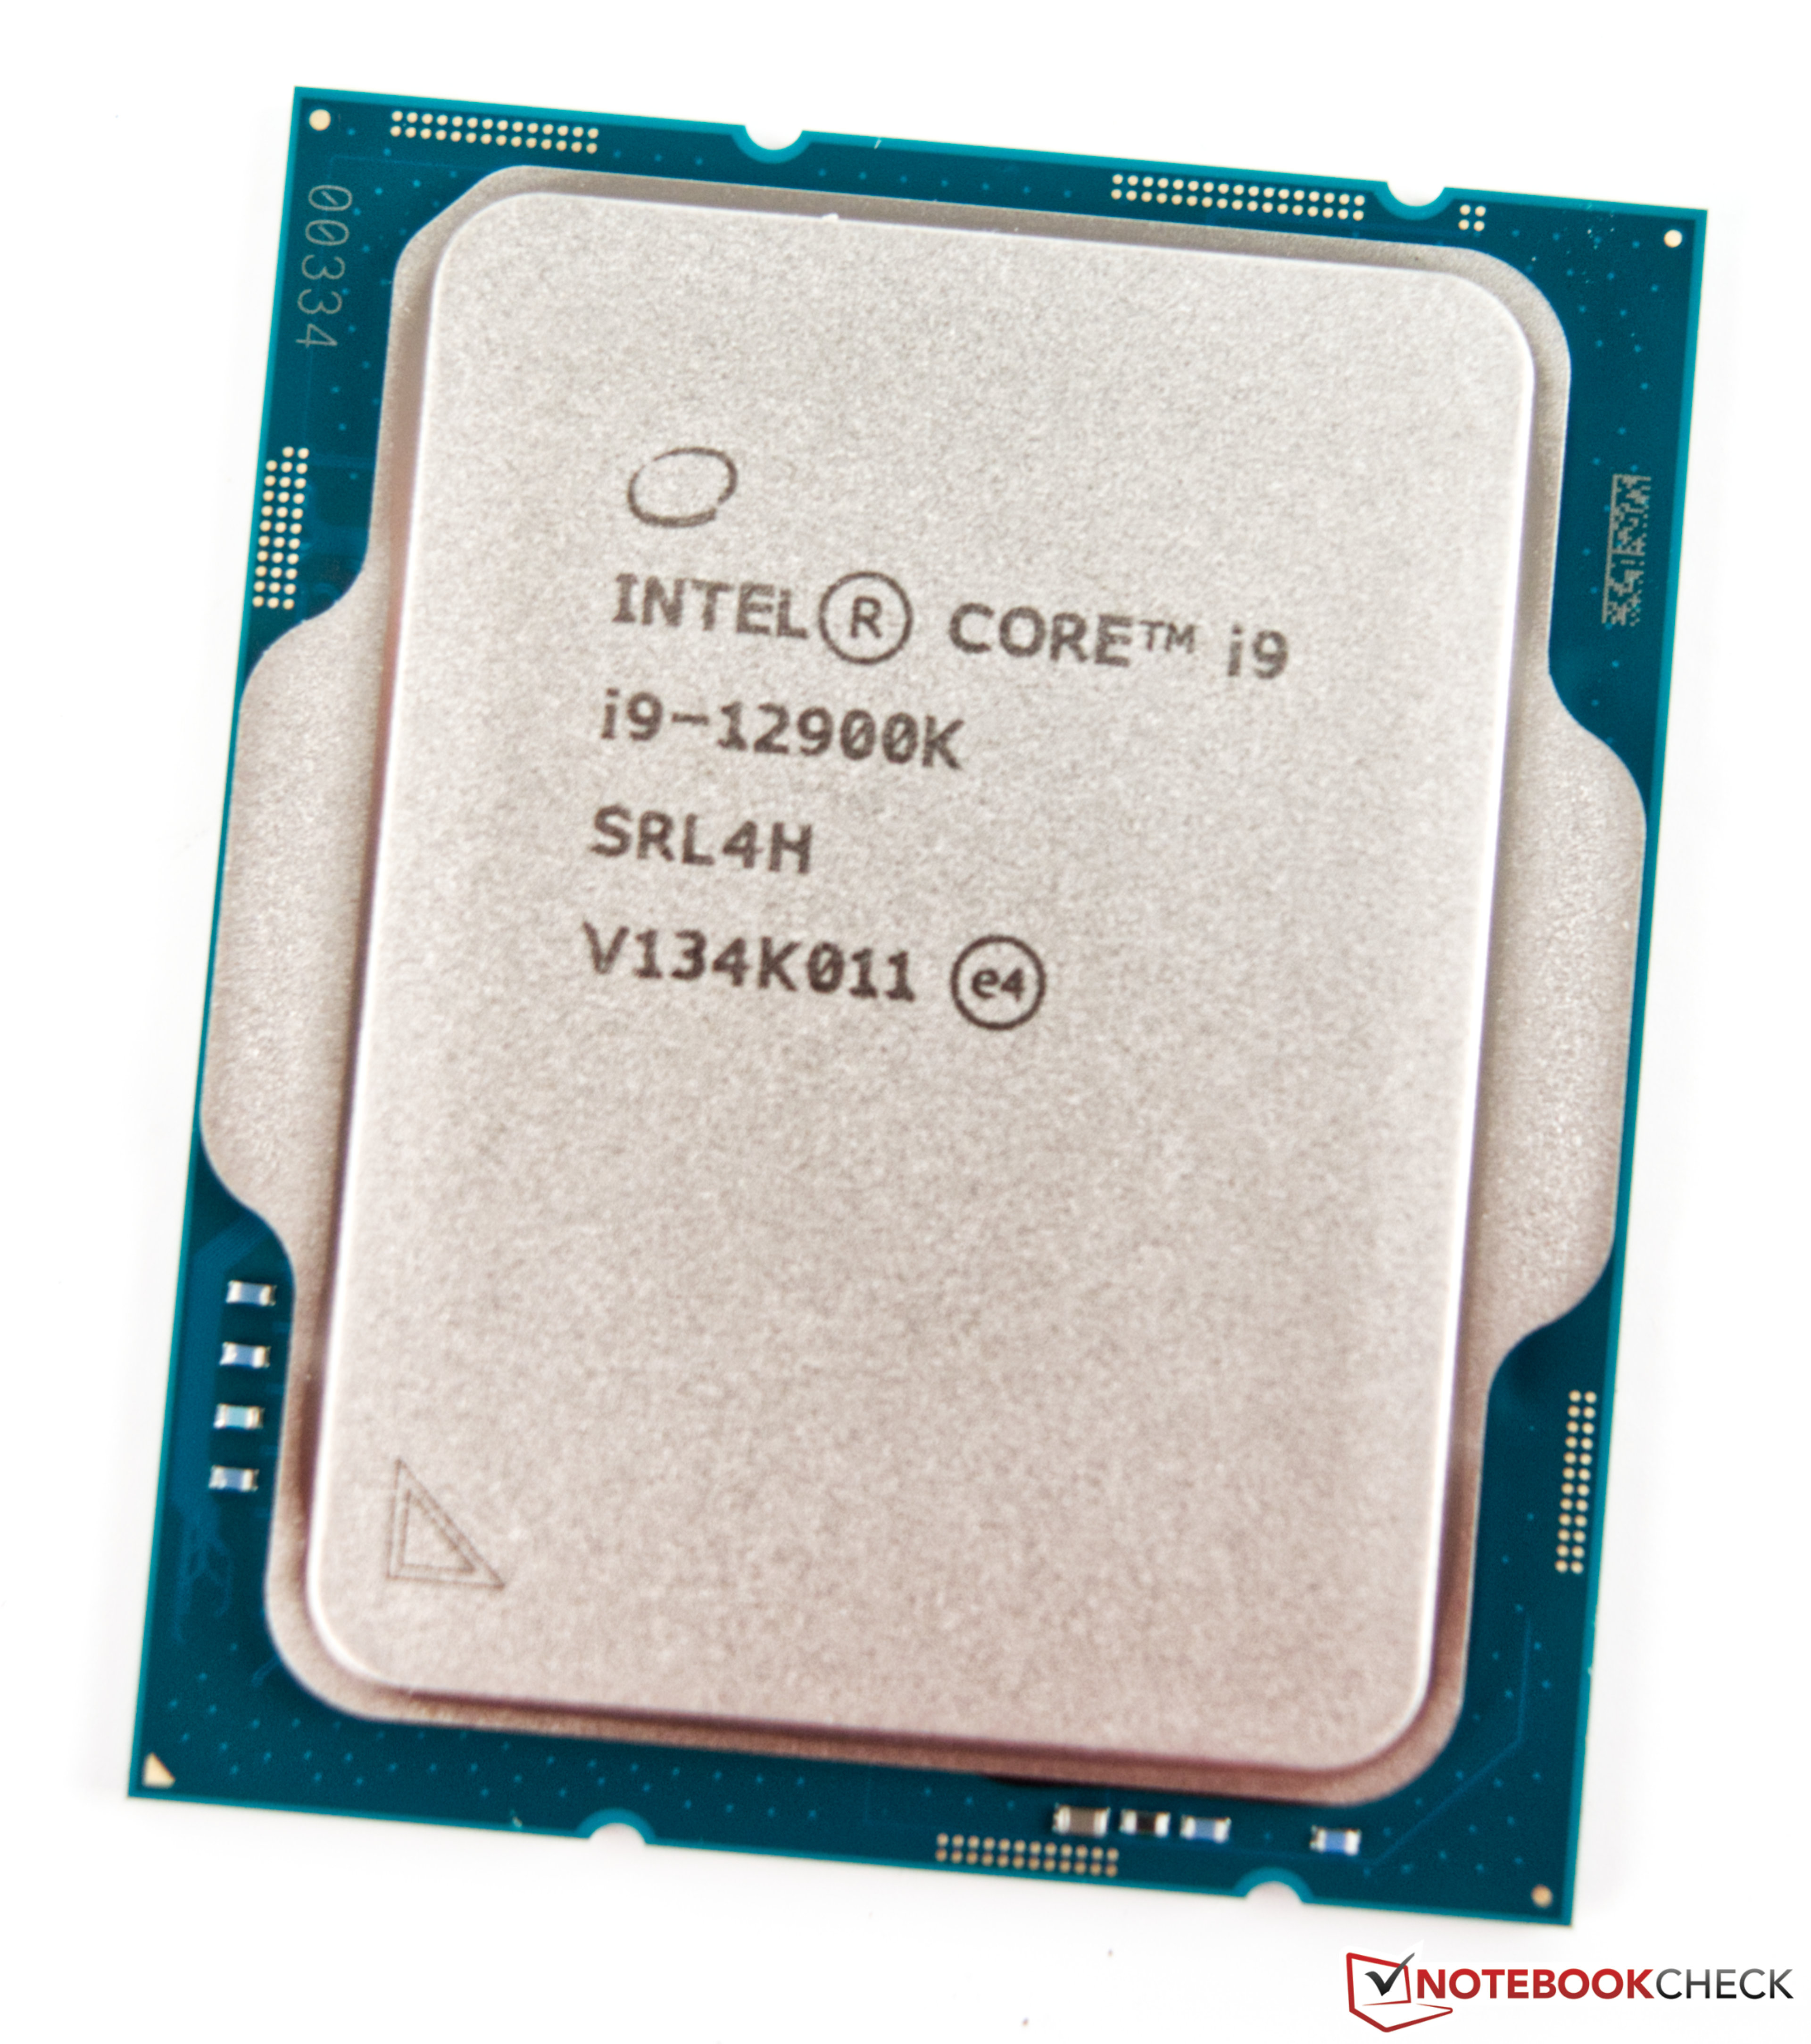 Intel Core i9-12900K Processor - Benchmarks and Specs